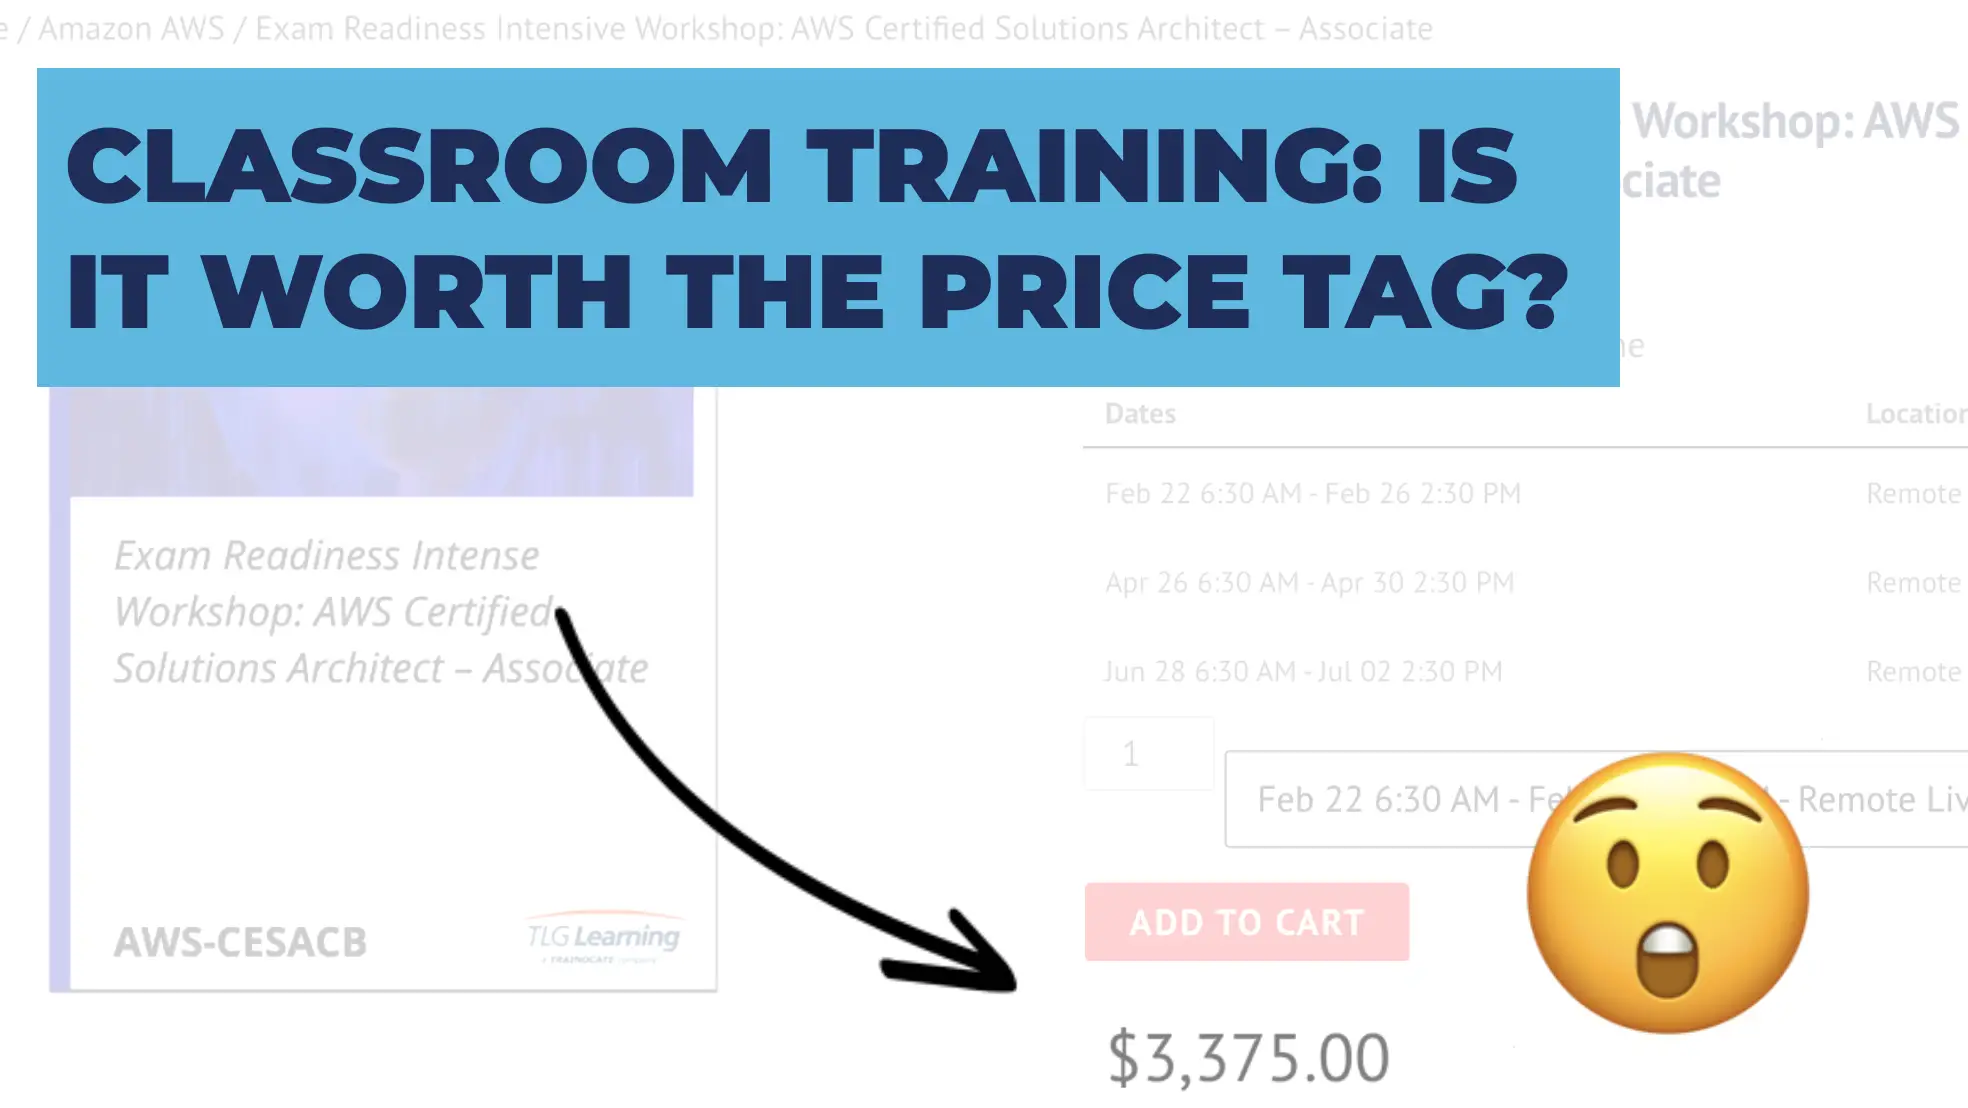 Classroom Training: Is It Worth The Price Tag?